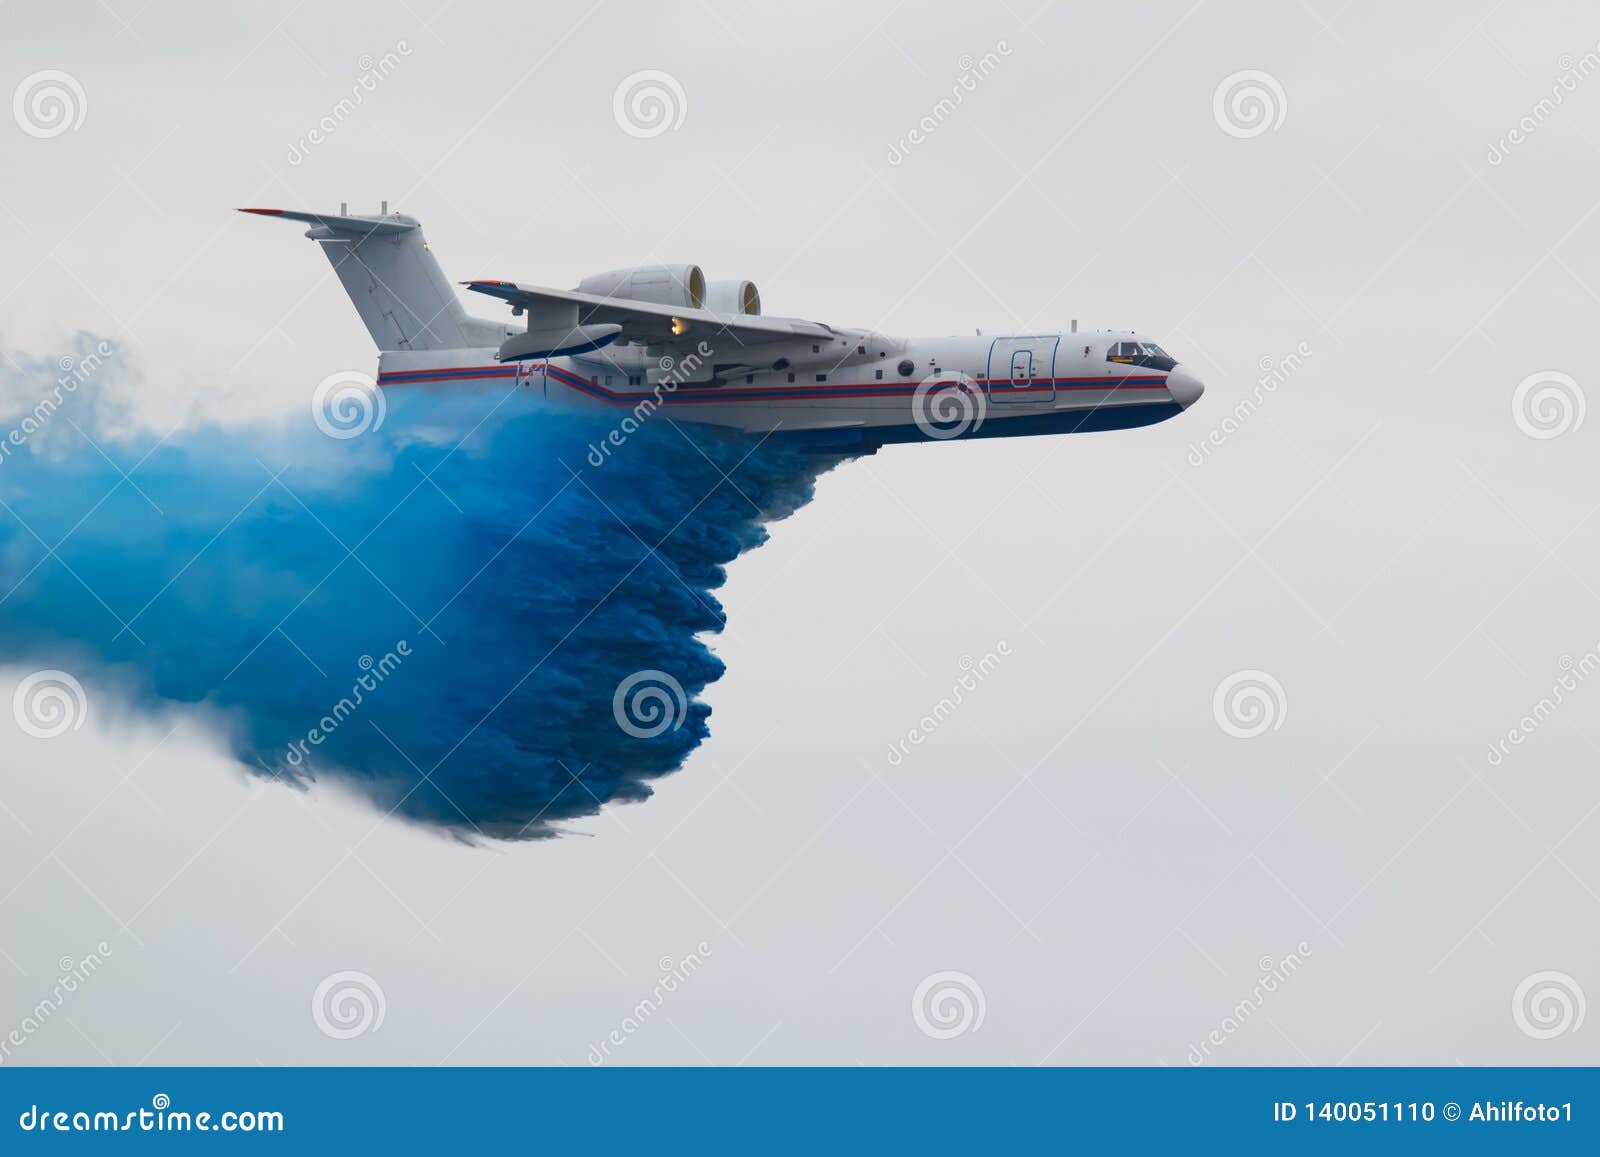 a large rescue plane dumps water to extinguish a fire